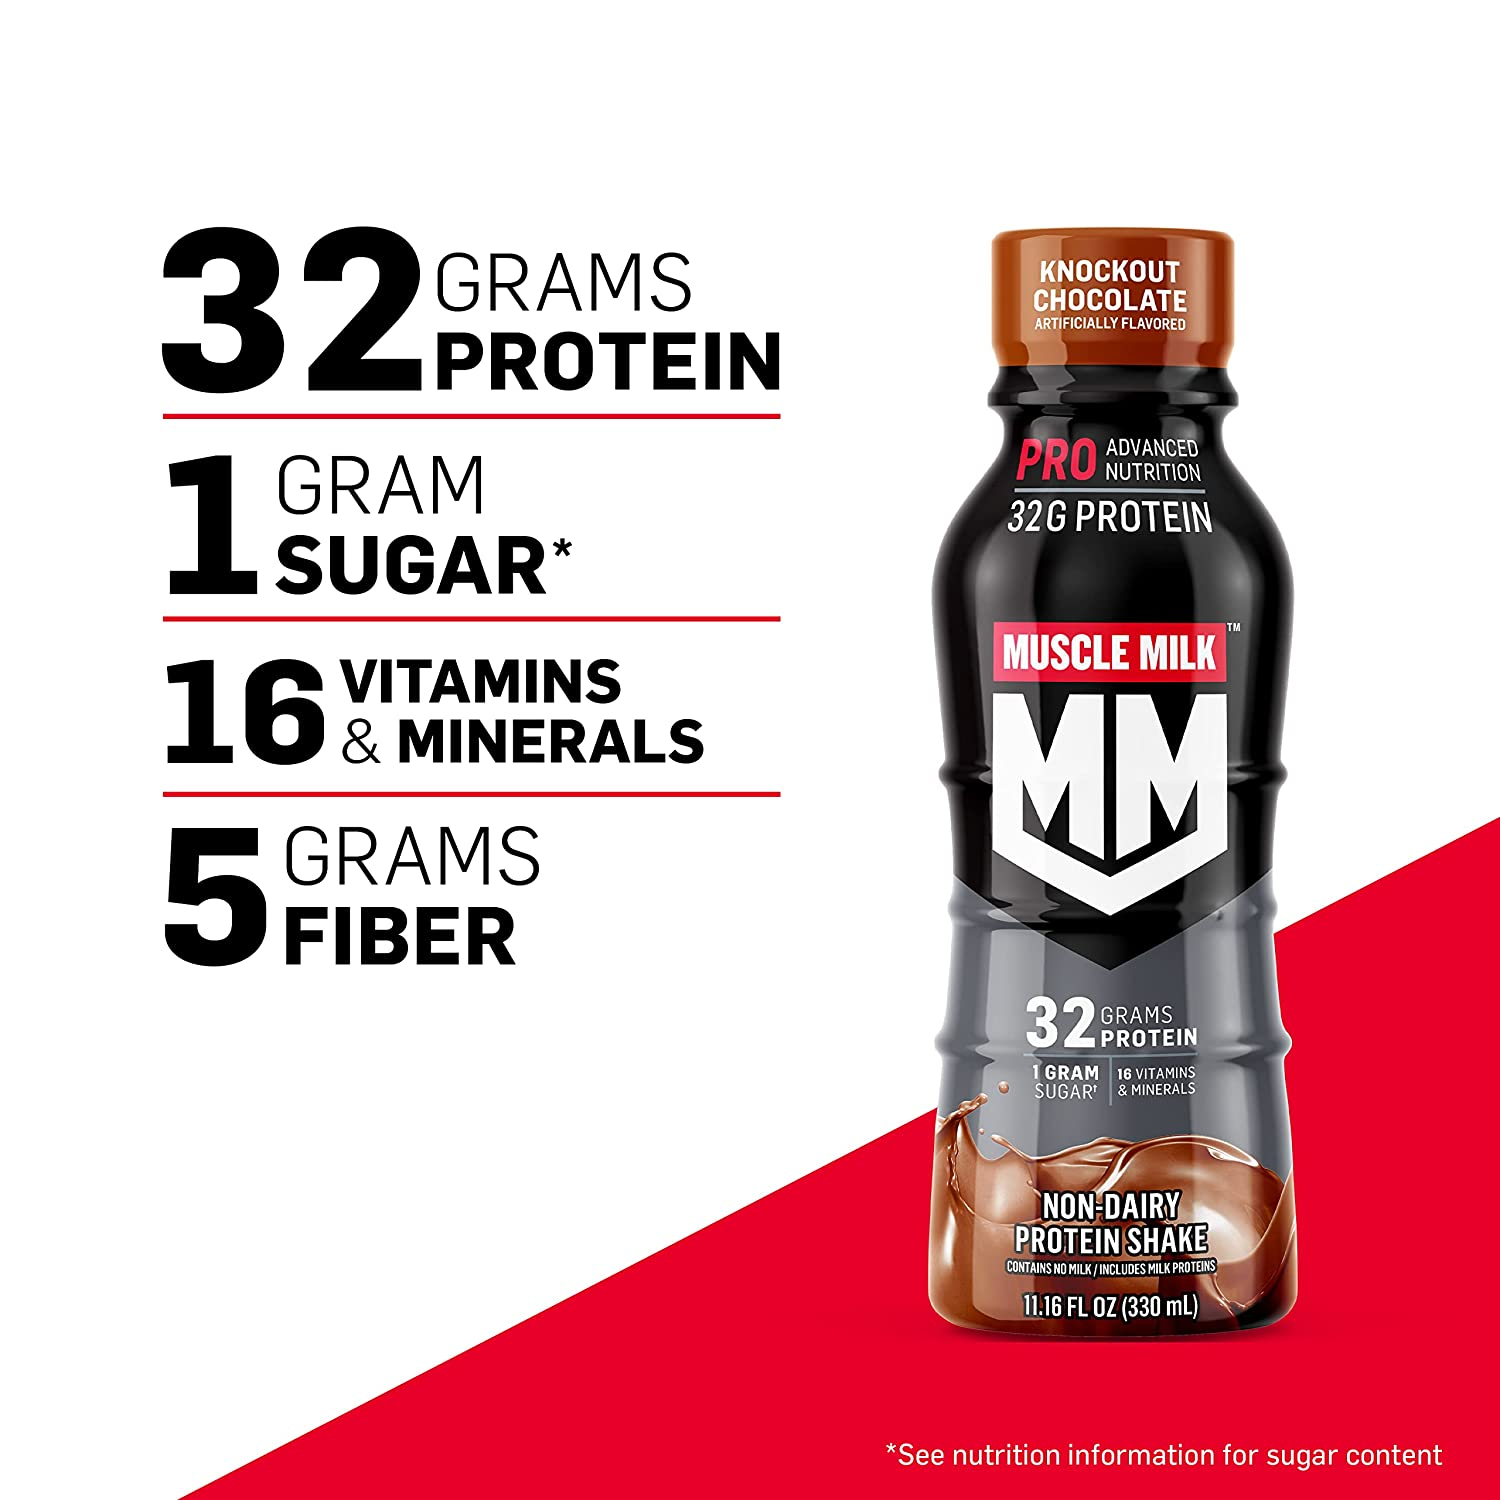 Muscle Milk Pro Advanced Nutrition Protein Shake, Knockout Chocolate, 11.16 Fl Oz Bottle, 12 Pack, 32G Protein, 1G Sugar, 16 Vitamins & Minerals, 5G Fiber, Workout Recovery, Energizing Snack, Packaging May Vary